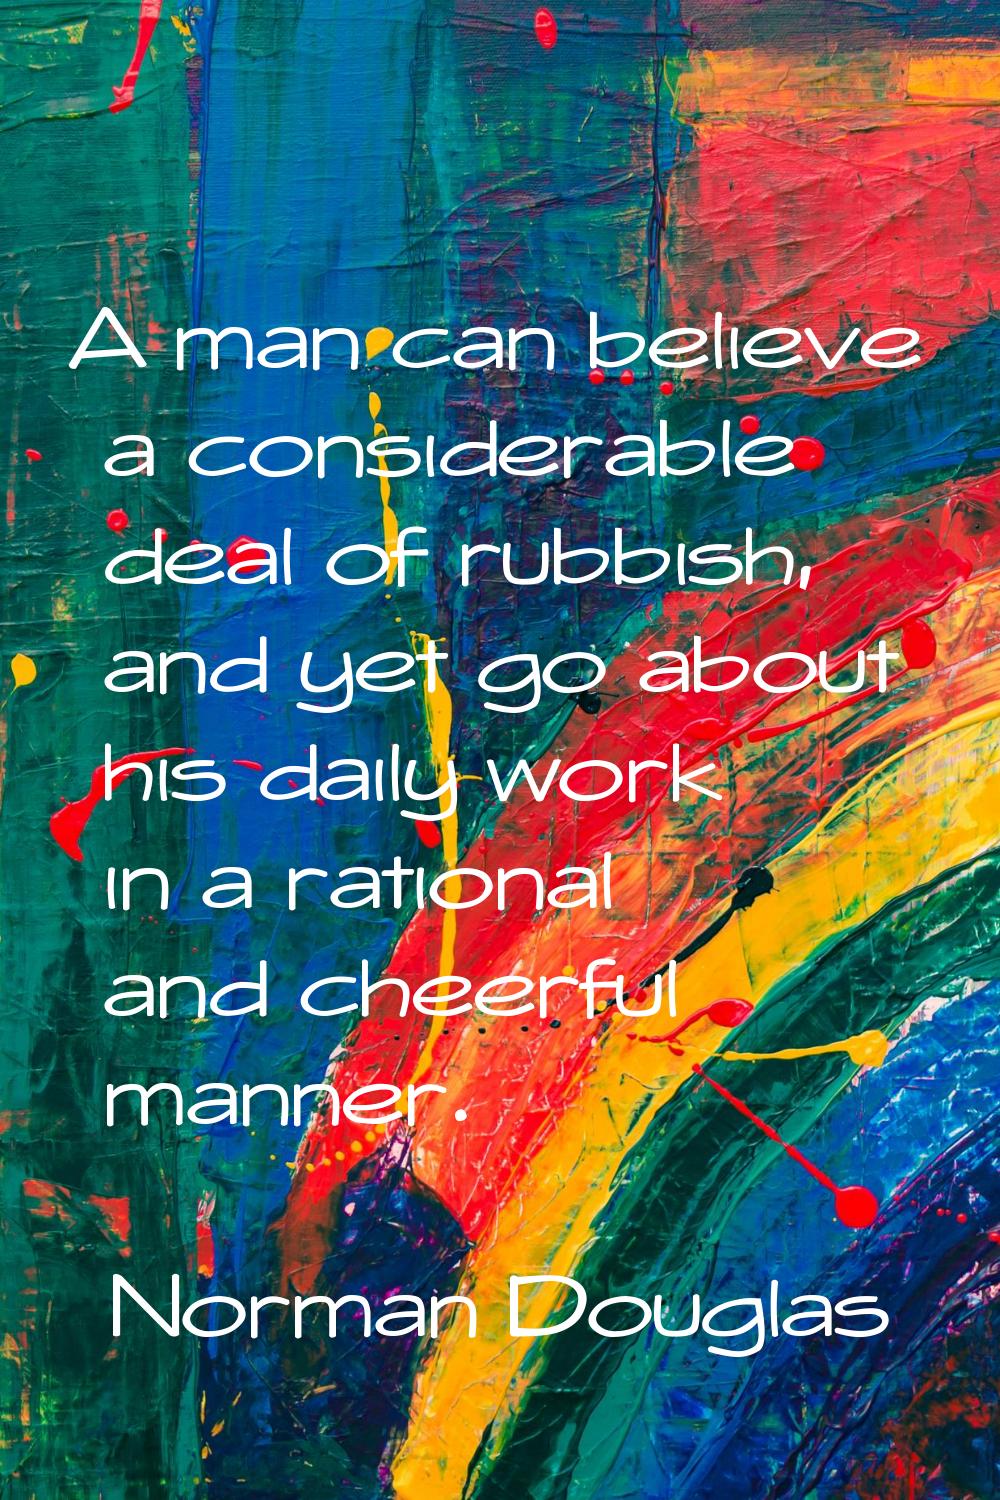 A man can believe a considerable deal of rubbish, and yet go about his daily work in a rational and